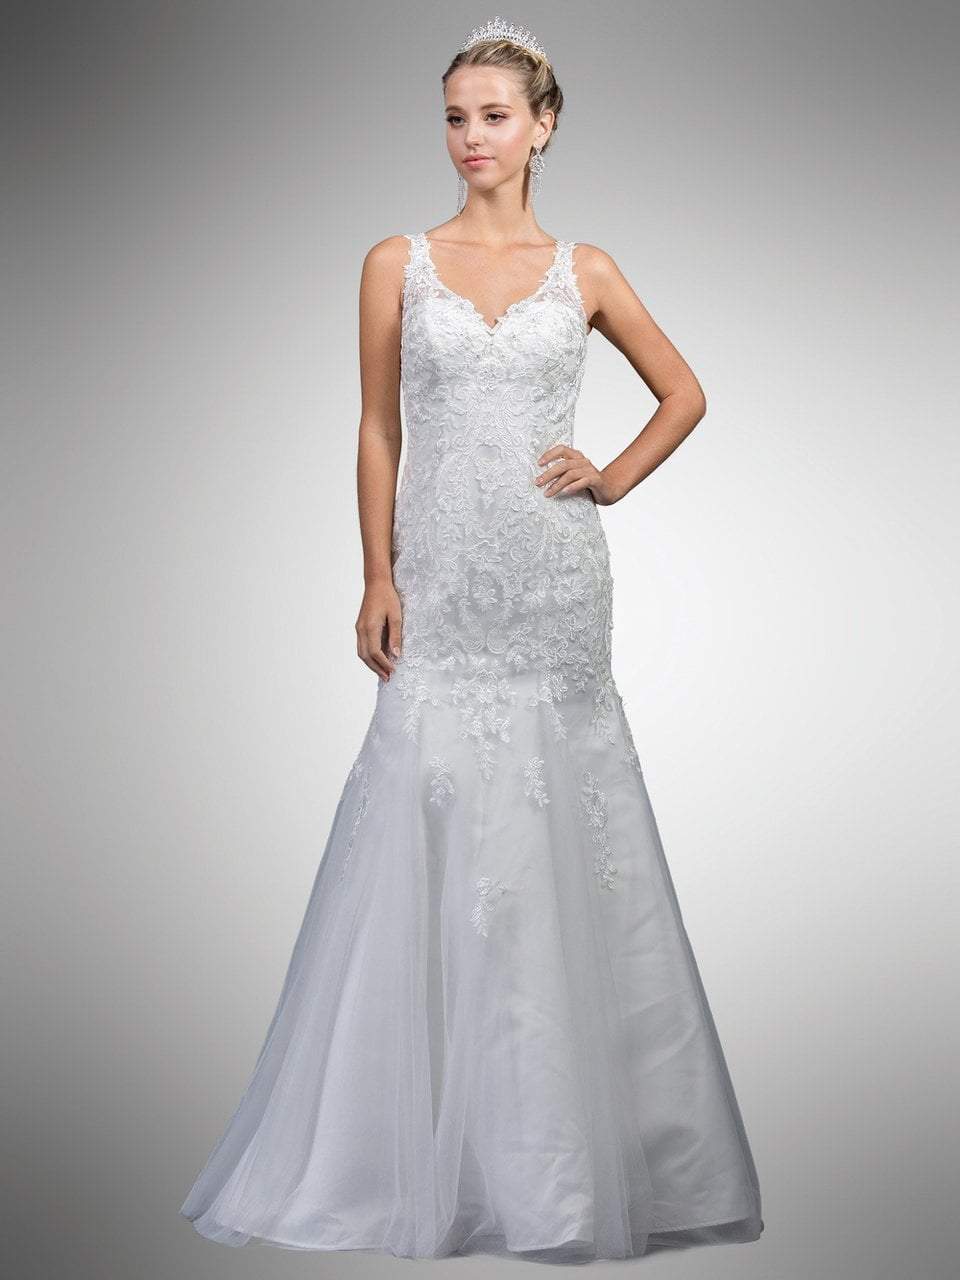 Image of Dancing Queen Bridal - A7001 Sleeveless Beaded Lace Trumpet Gown